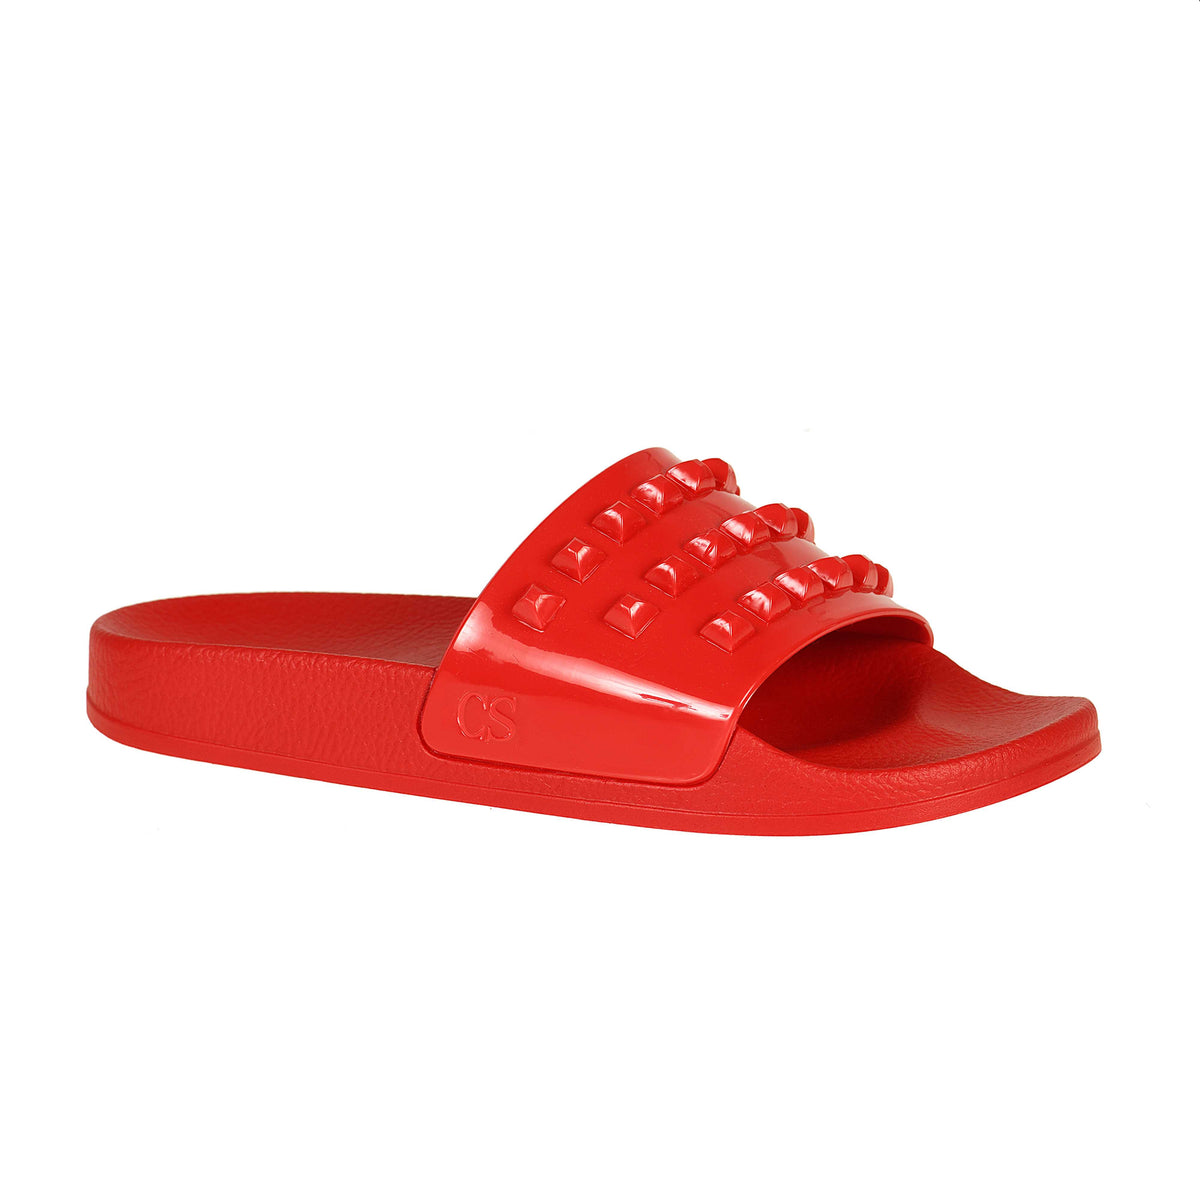 Studded Carmen Sol Franco red jelly slides perfect for the beach